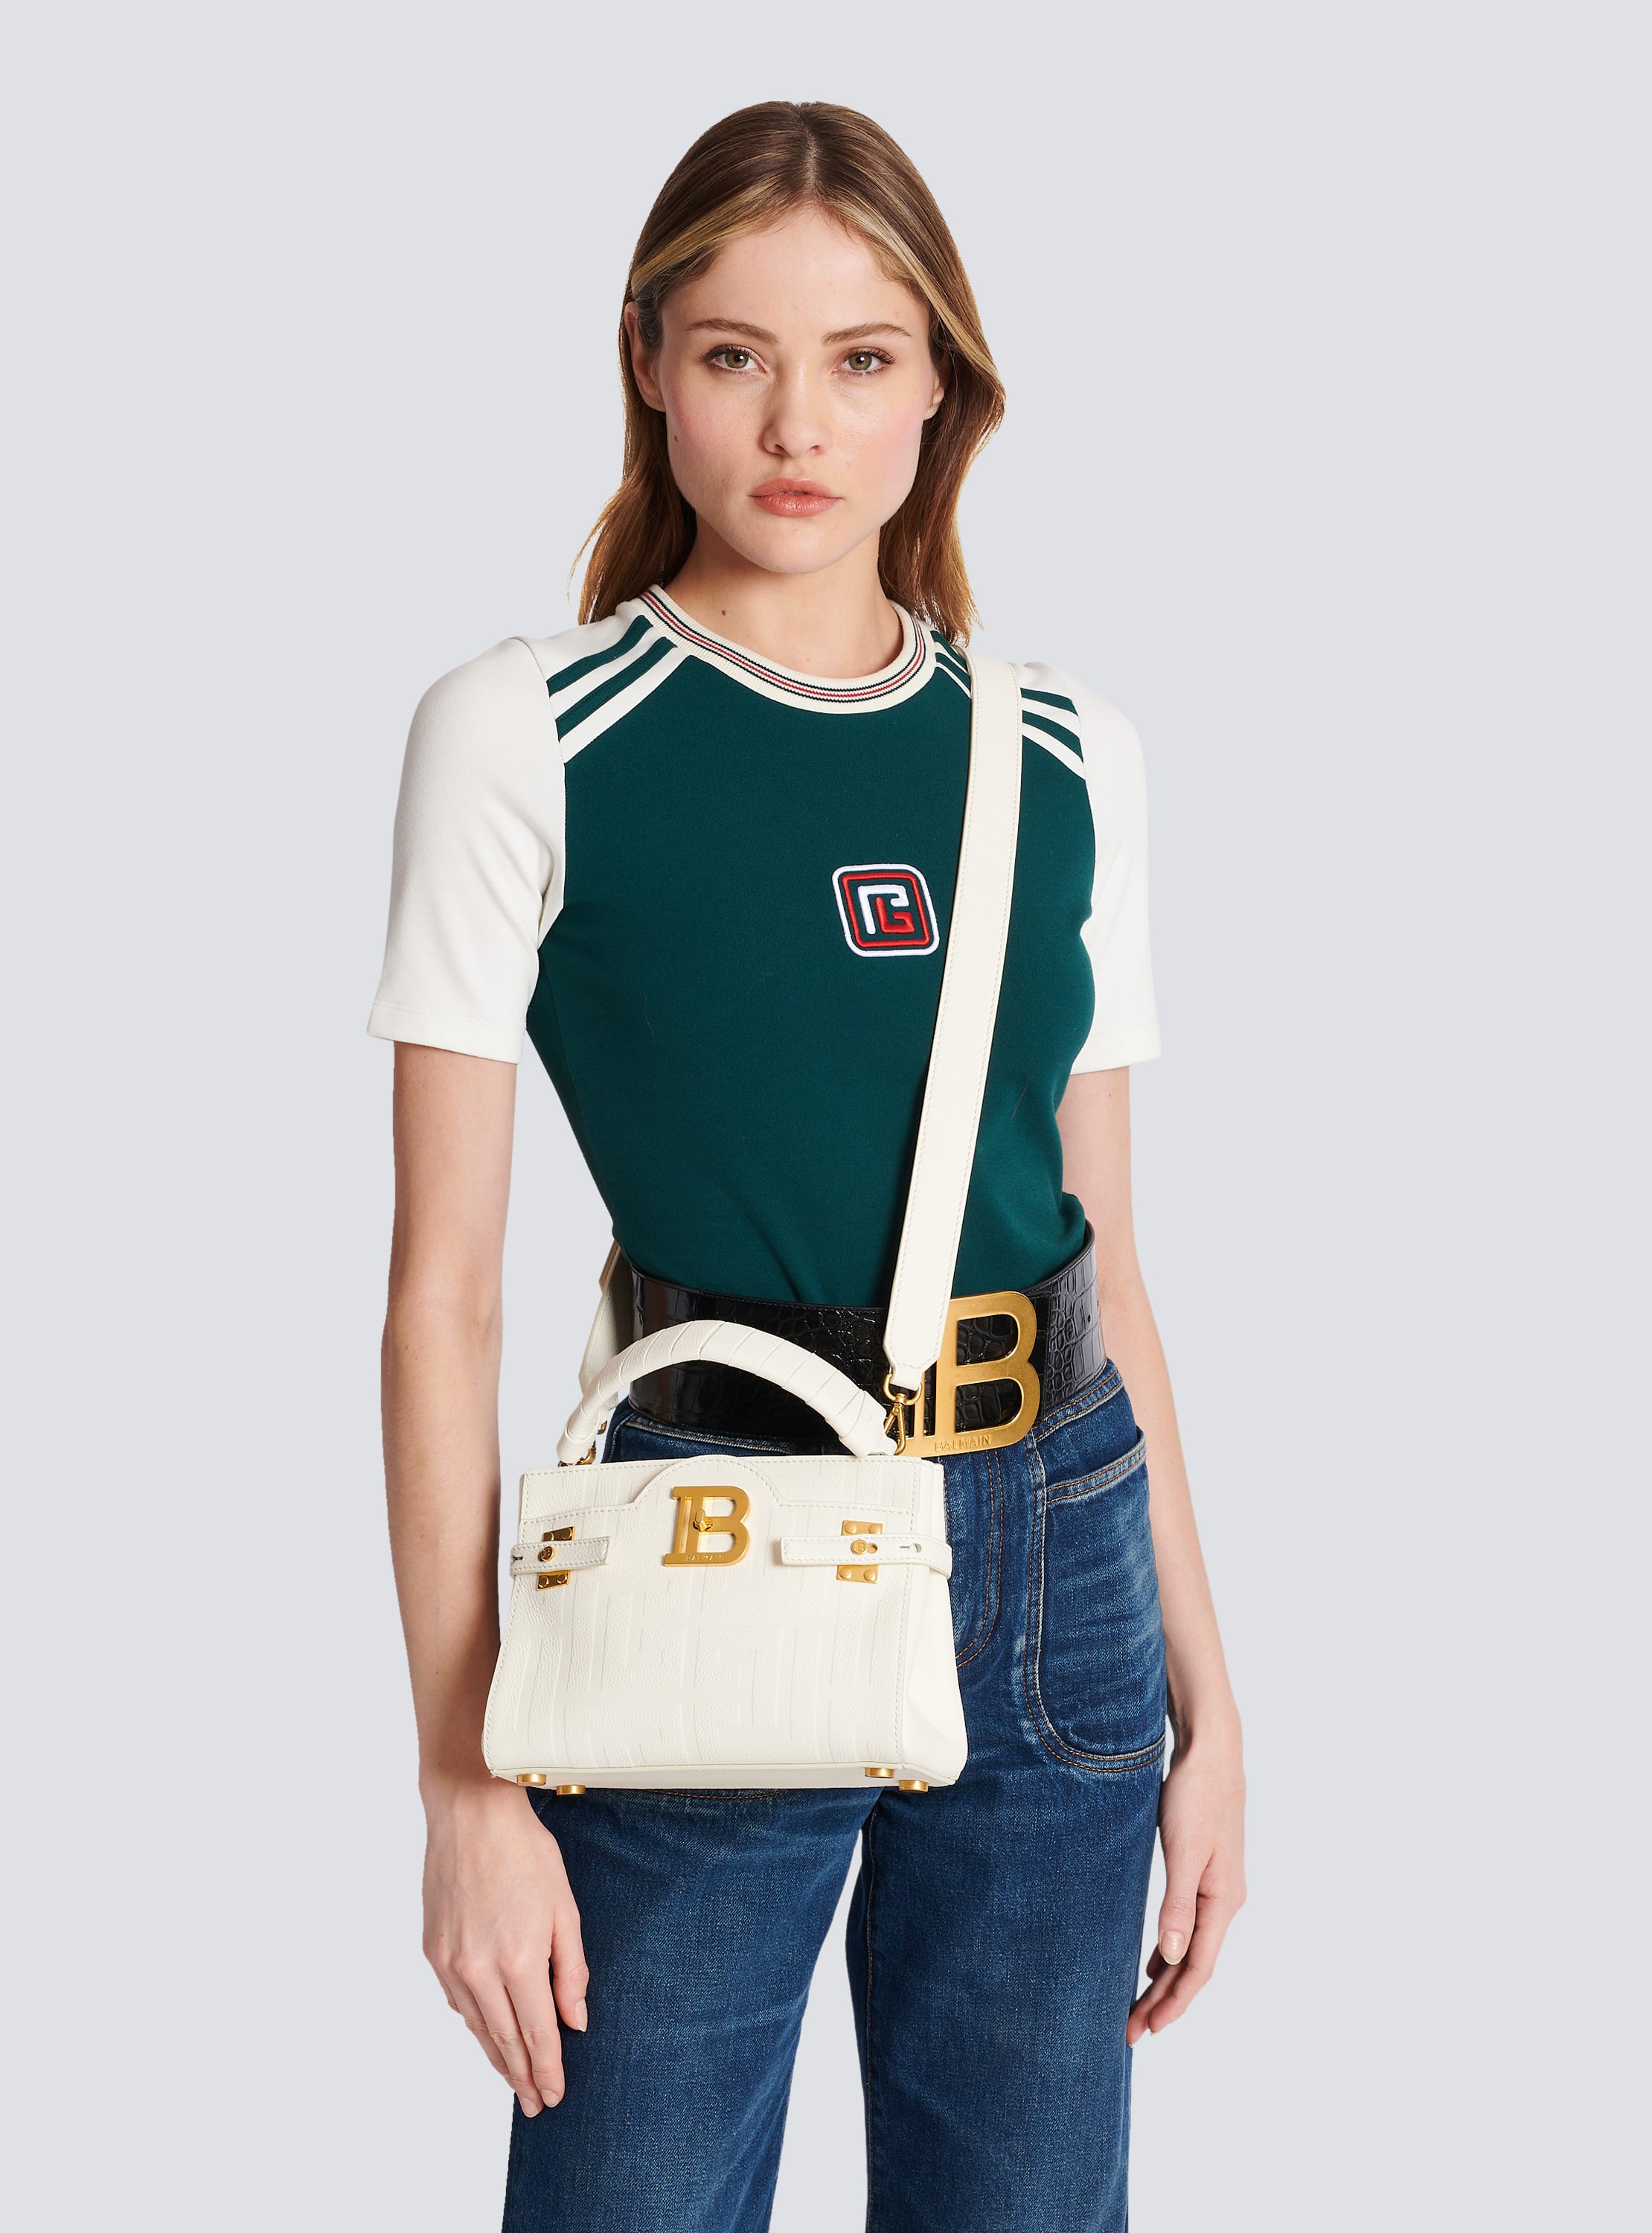 B-Buzz 22 Top Handle bag in leather with jacquard monogram